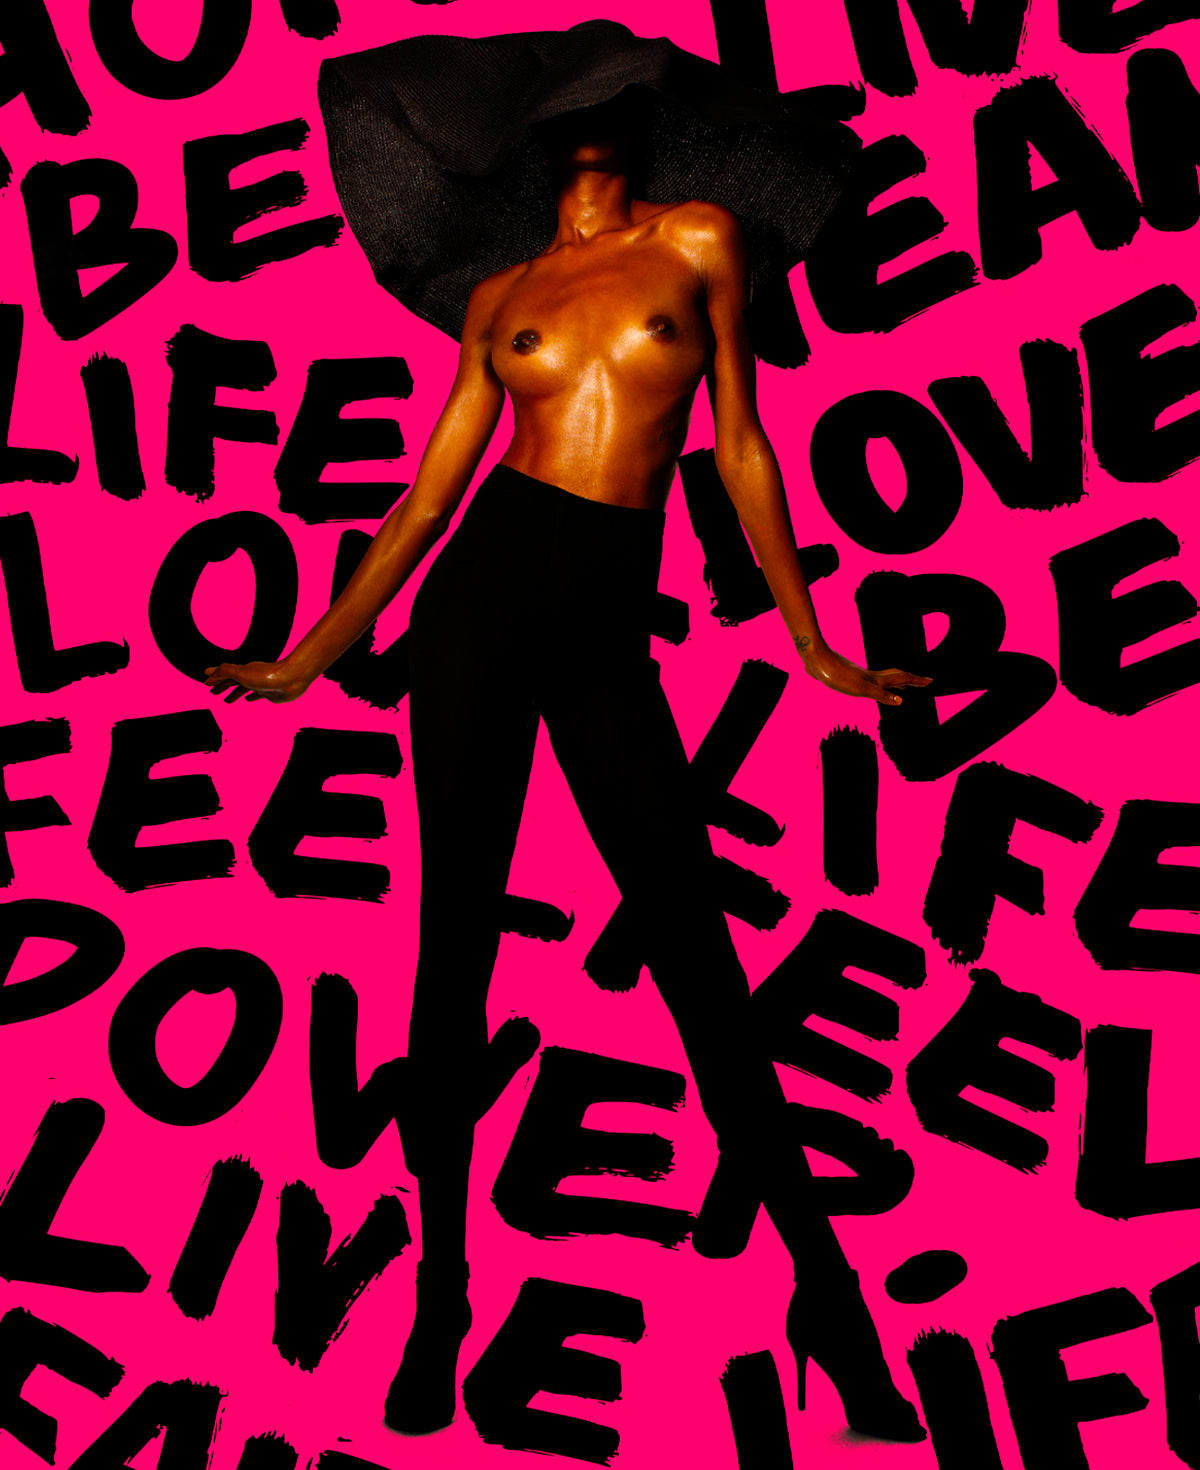 LIVE LIFE (PINK) / POP ART / Limited Editions from €200,- Worldwide shipping 